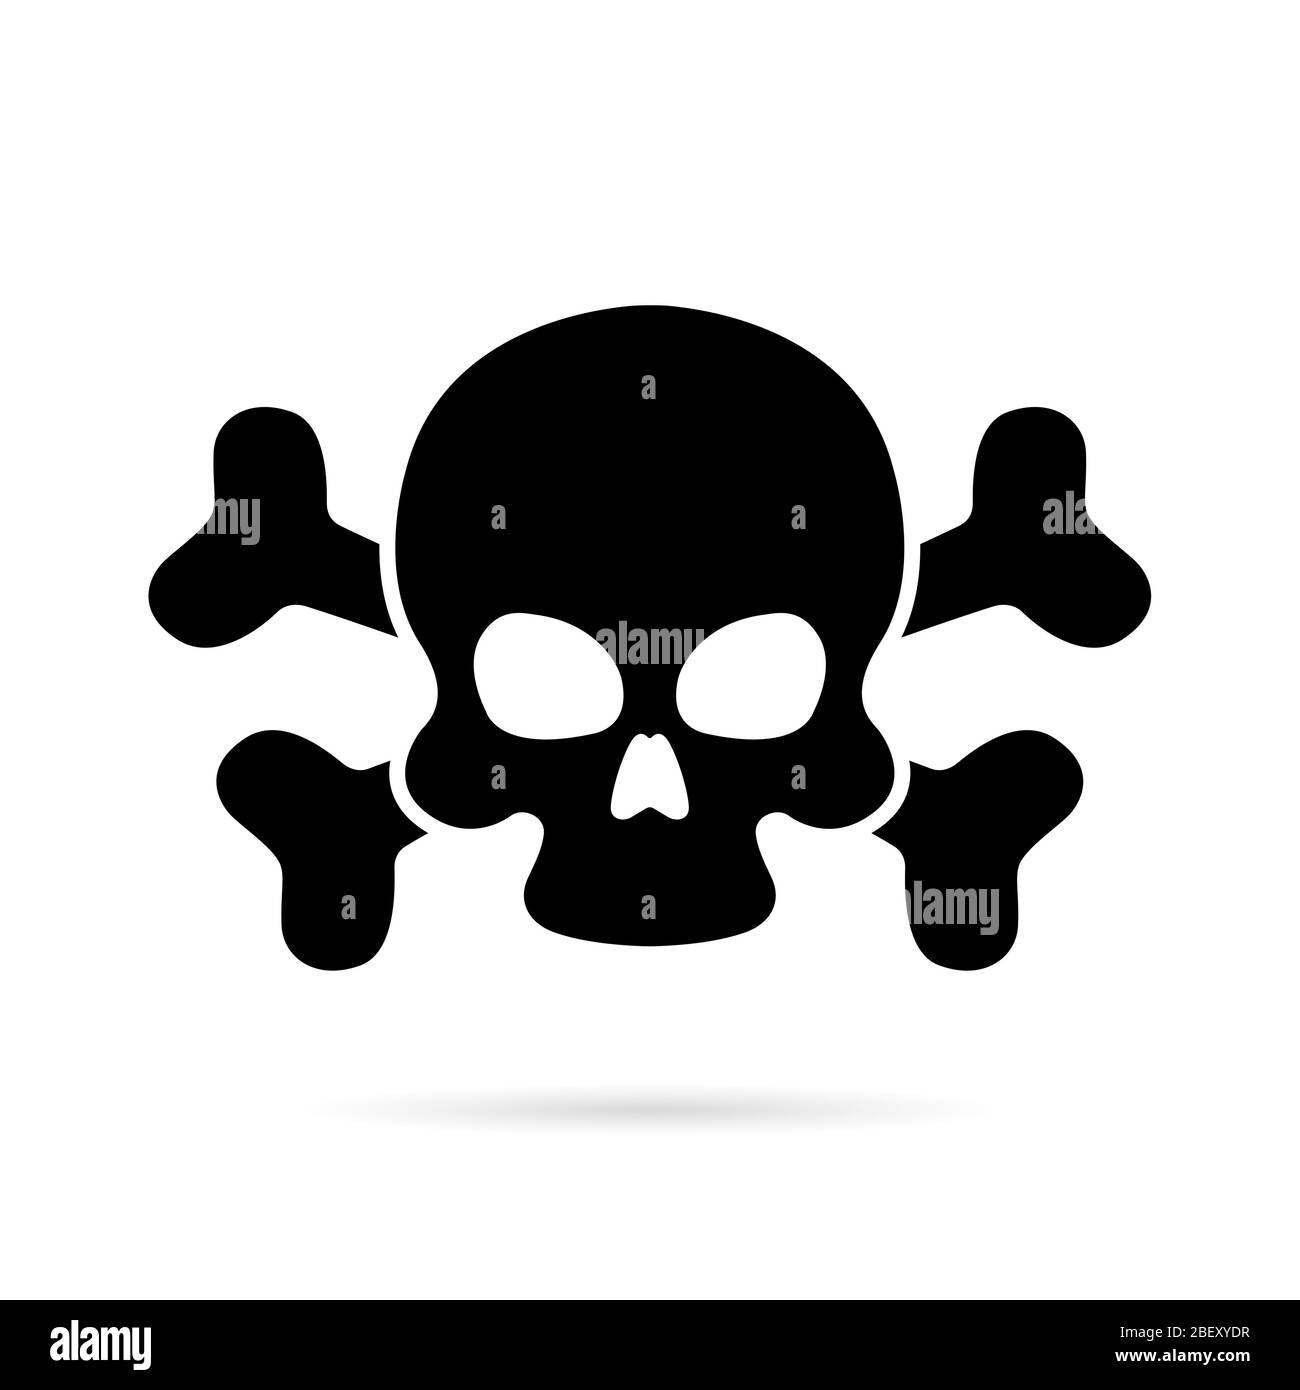 Skull and crossbones icon on a white background. Death symbol, danger or poison icon flat style for web sites Stock Vector